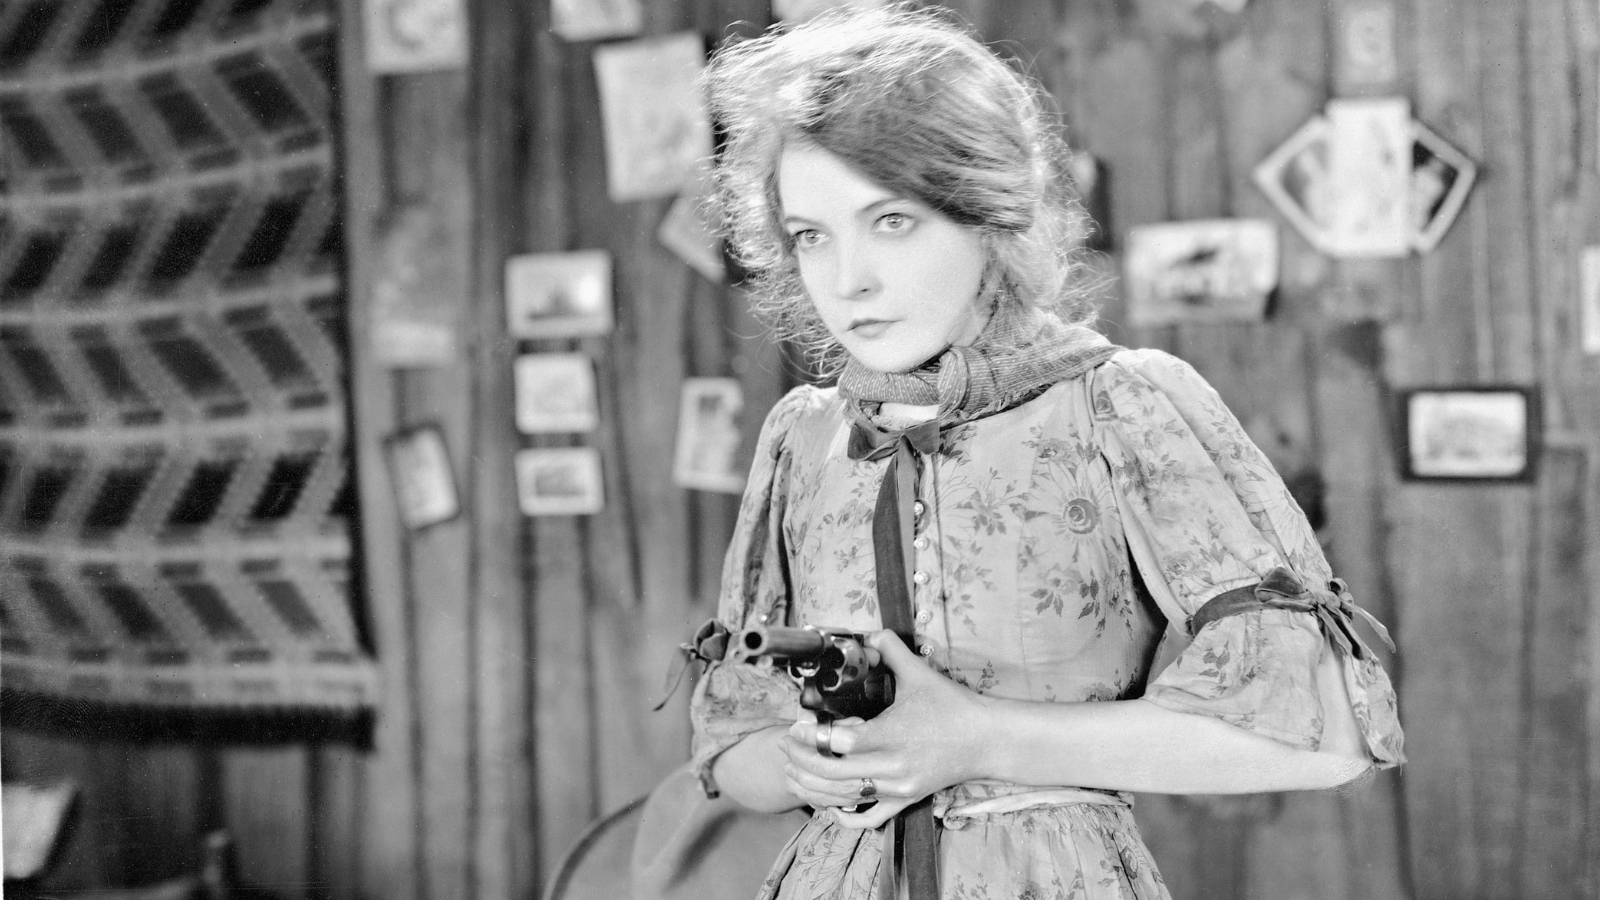 this black and white still from the film The Wind features actress Lillian Gish looks off screen to the left of the image while pointing a gun that she holds in her hands